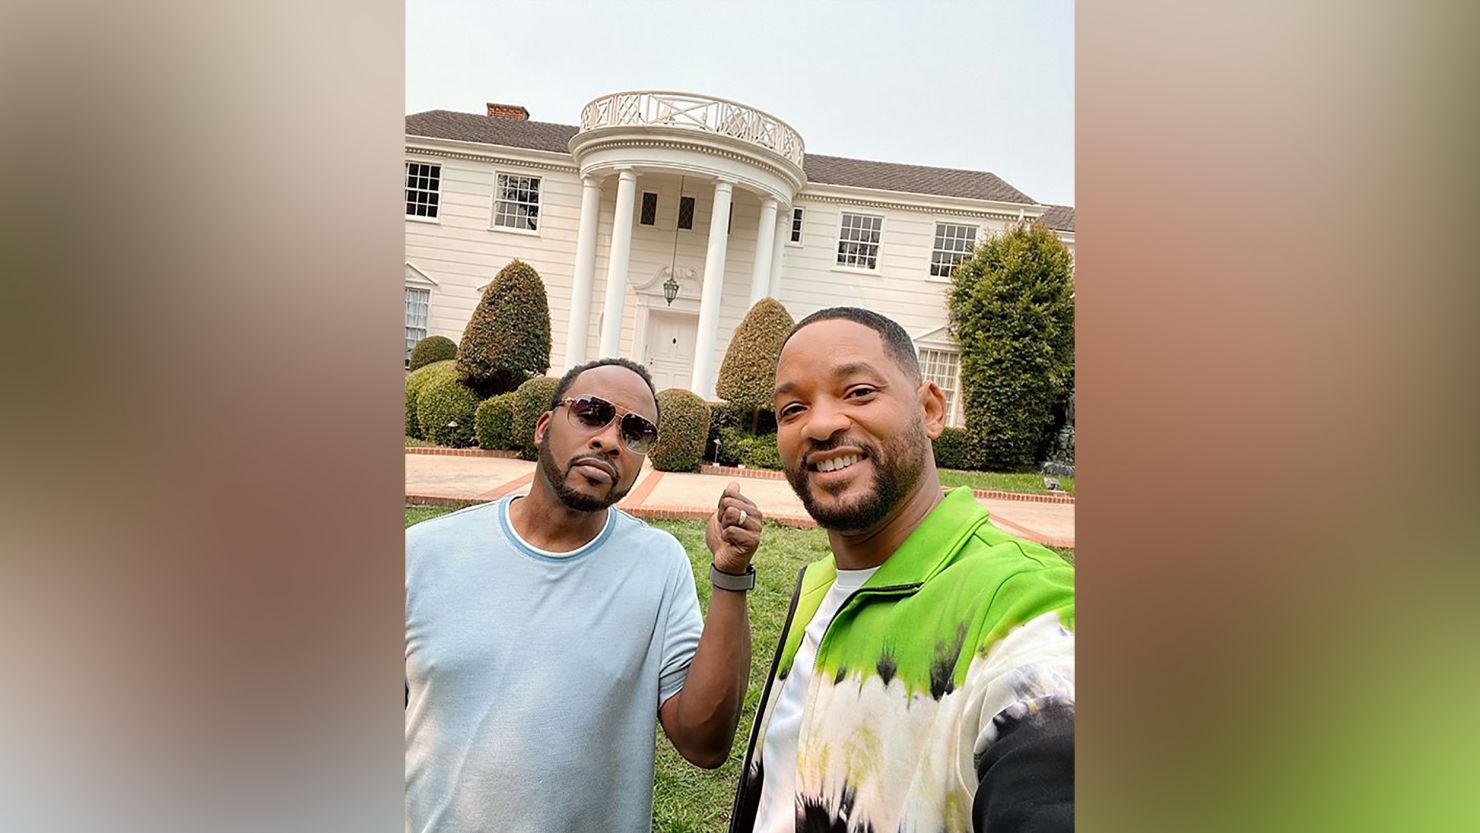 Will Smith is opening the doors to the 'Fresh Prince' mansion.